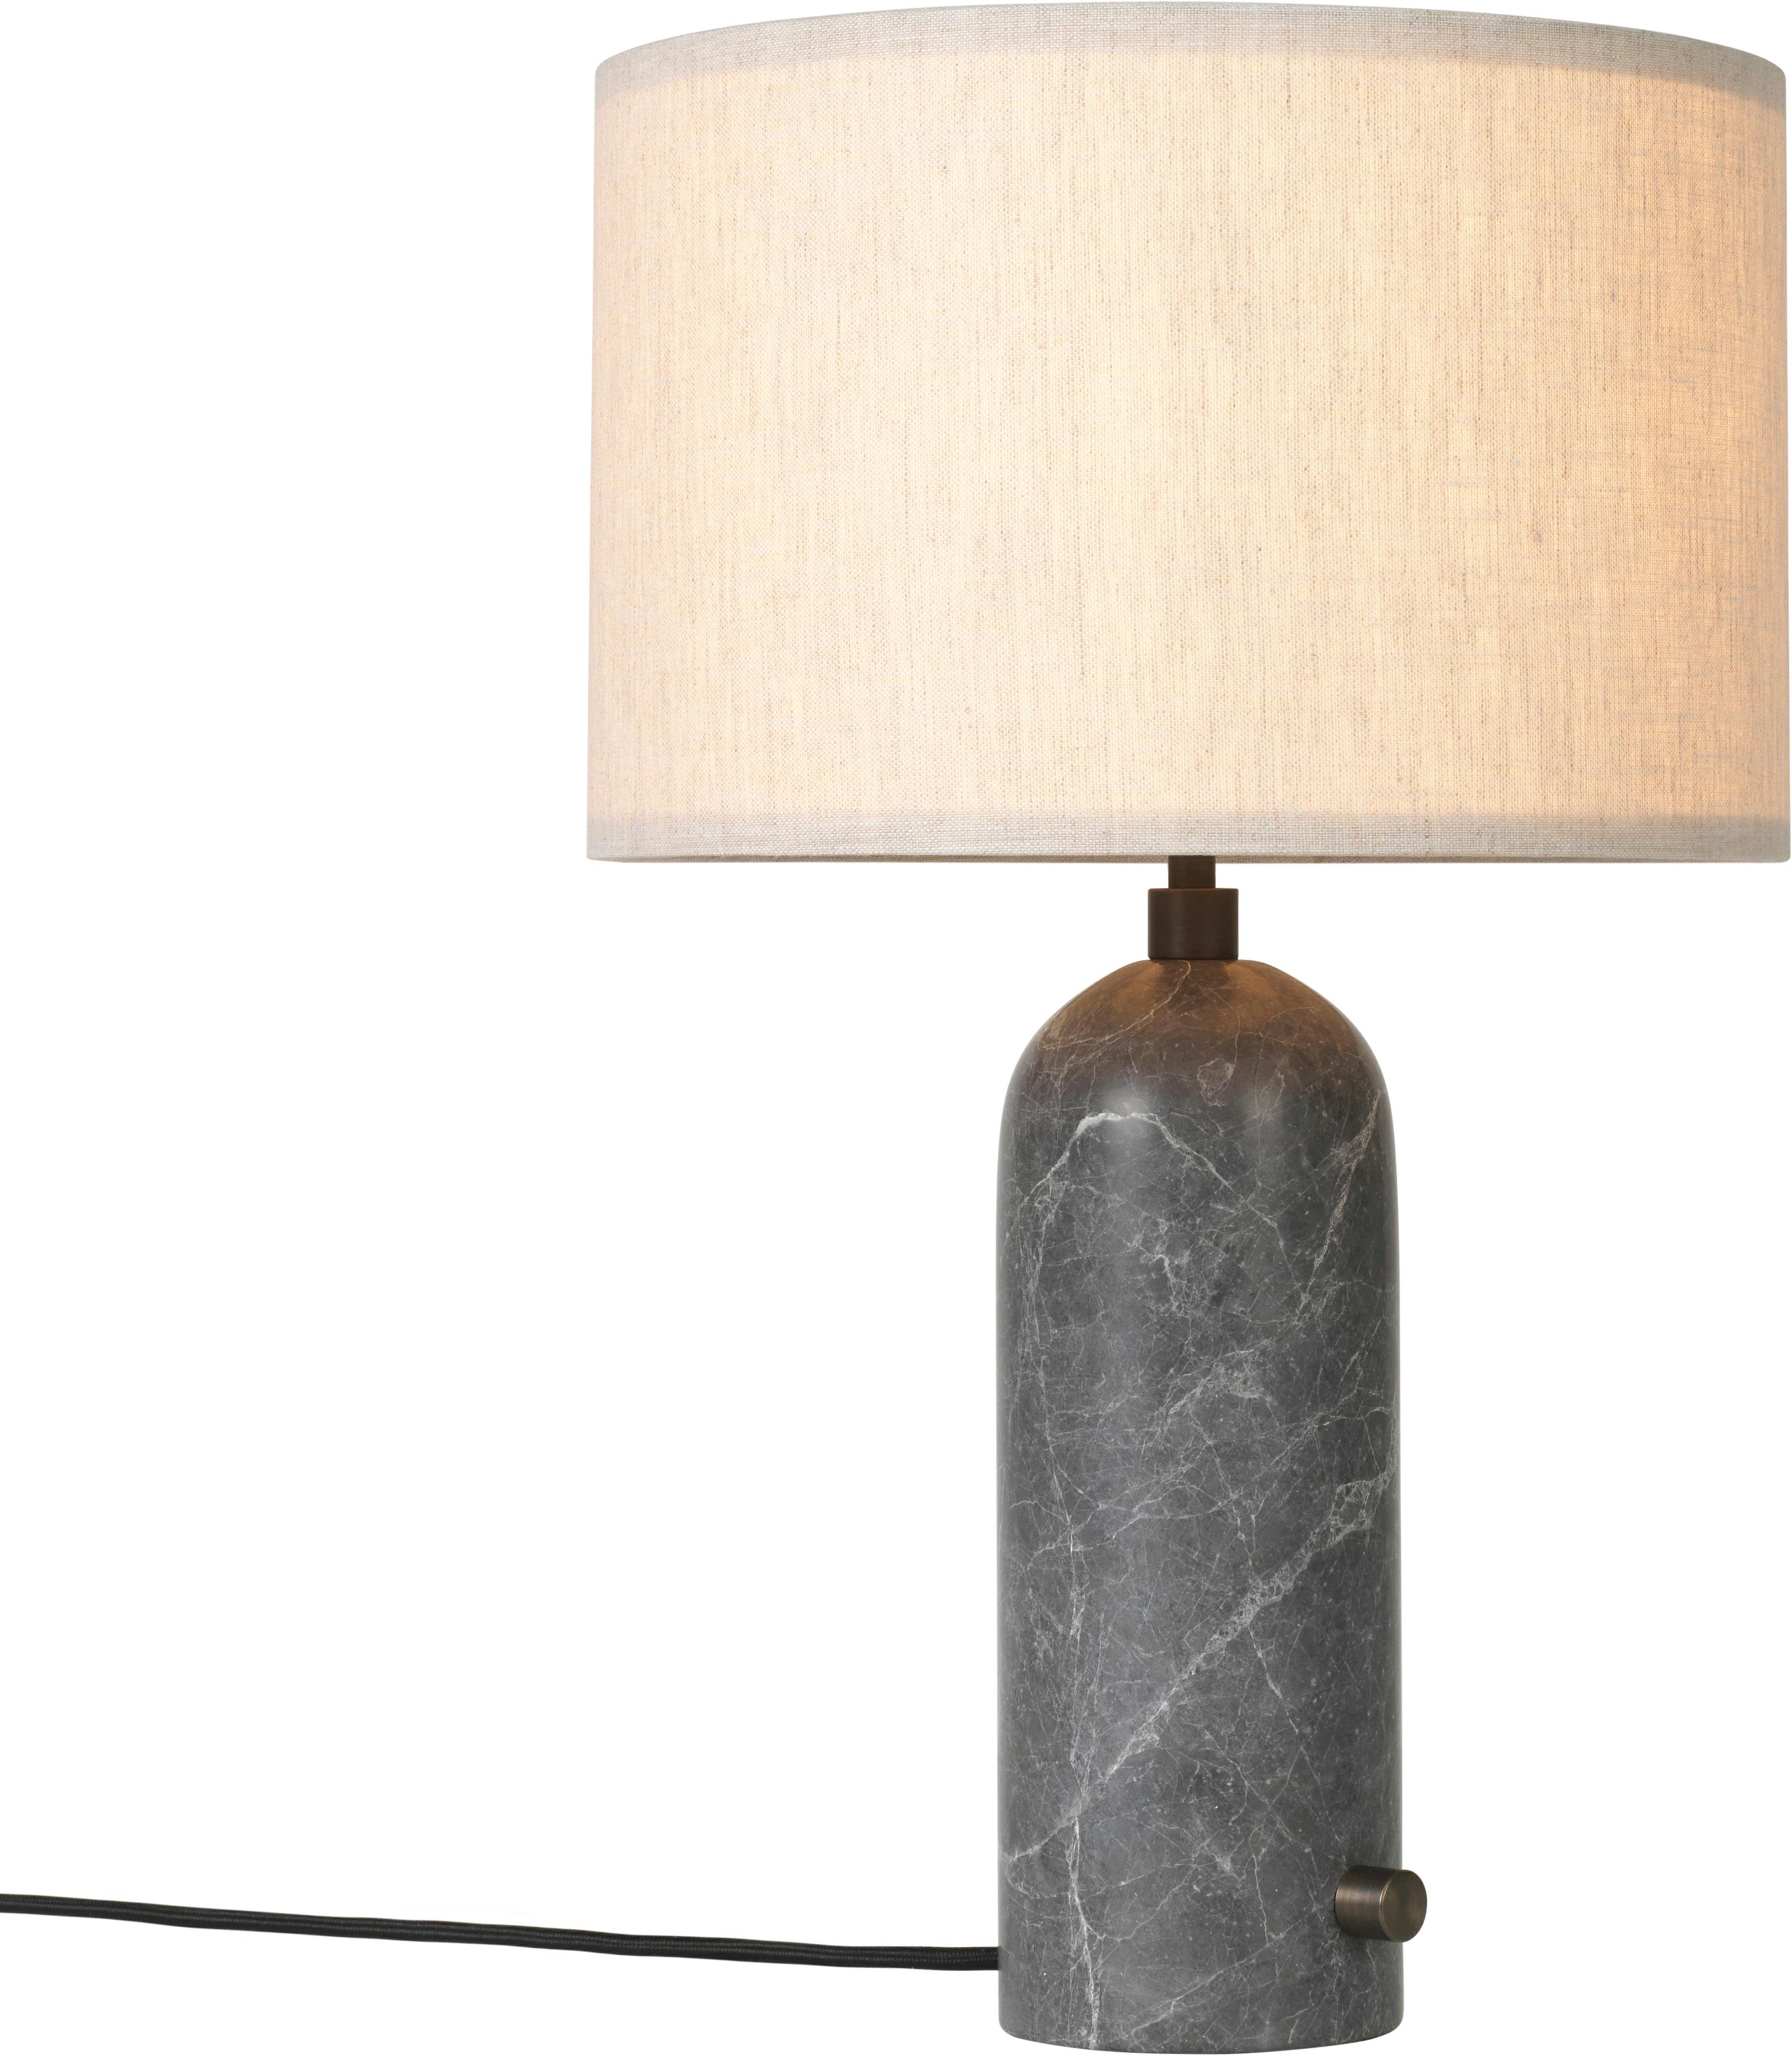 Large 'Gravity' Marble Table Lamp by Space Copenhagen for Gubi in Black For Sale 5